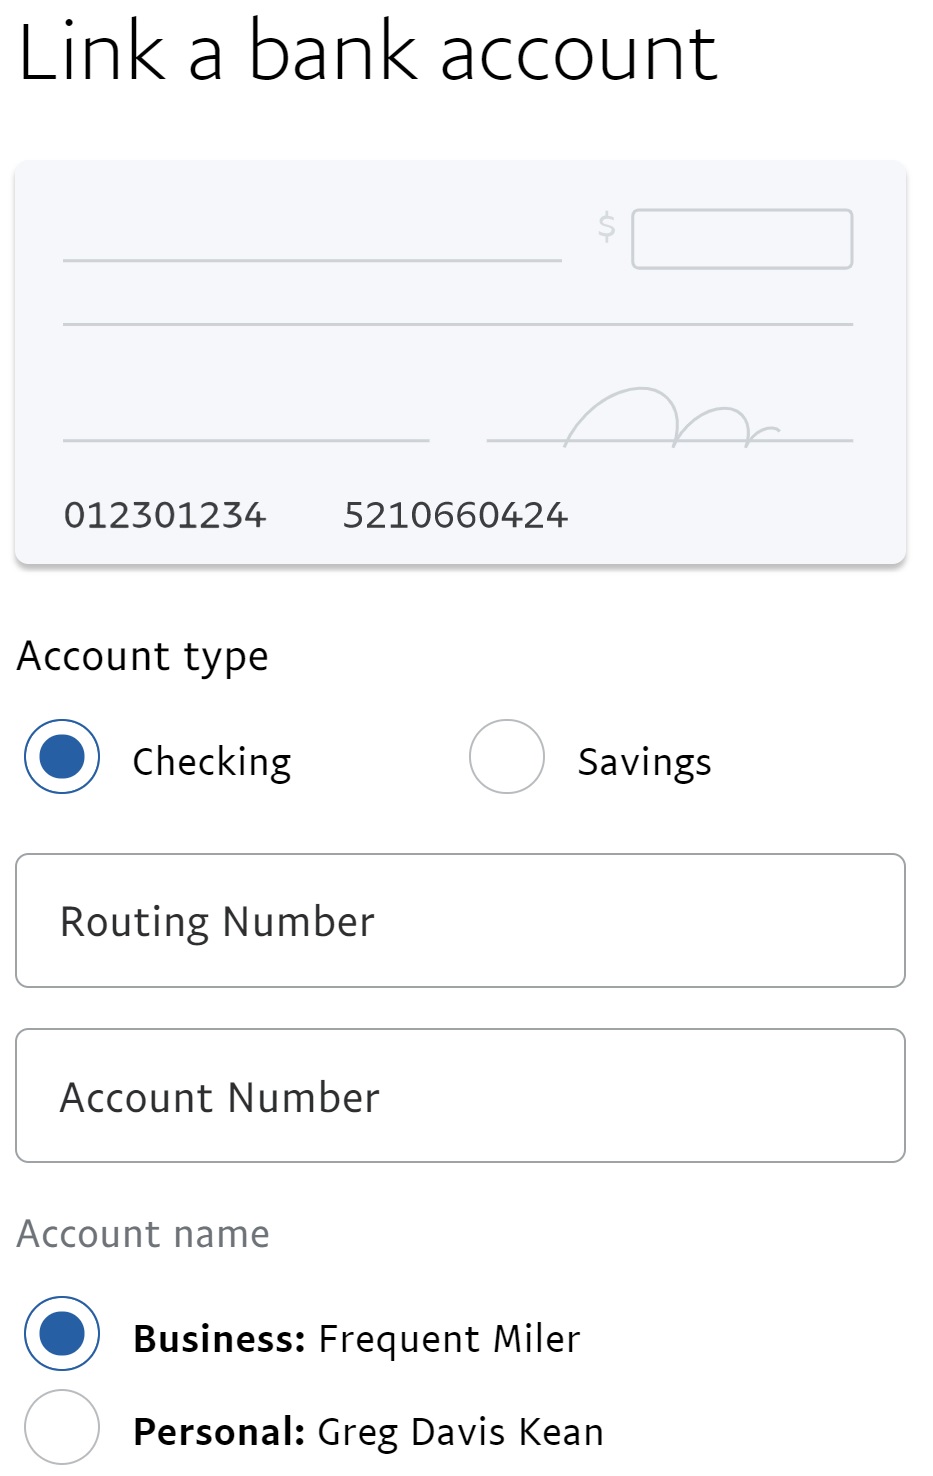 a screenshot of a mobile banking account